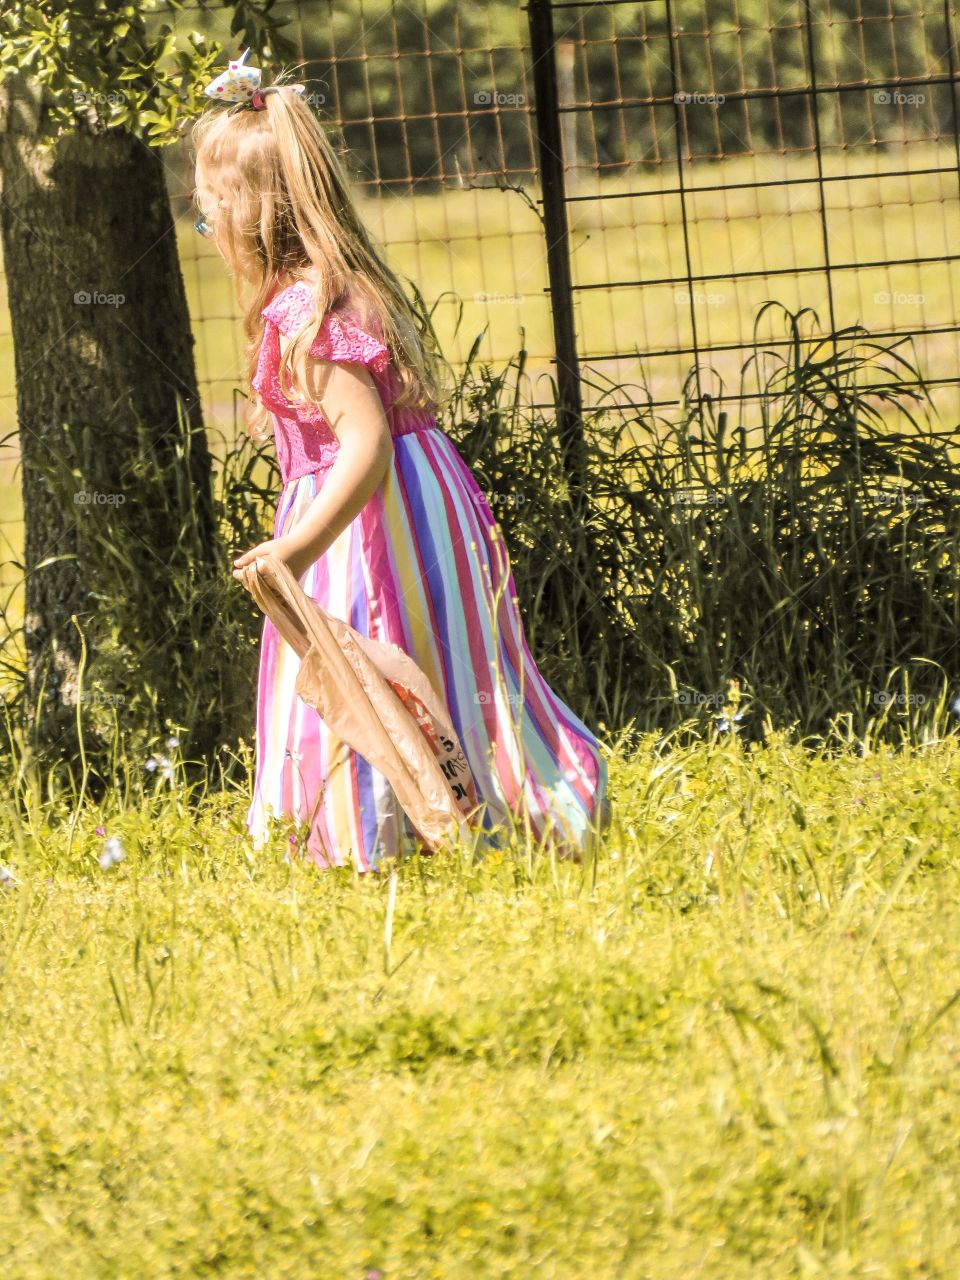 This is my beautiful sister Ava, she enjoyed the Easter hunt as much as I did!! I’ve got some more coming to you soon, I love my photo sessions so much.